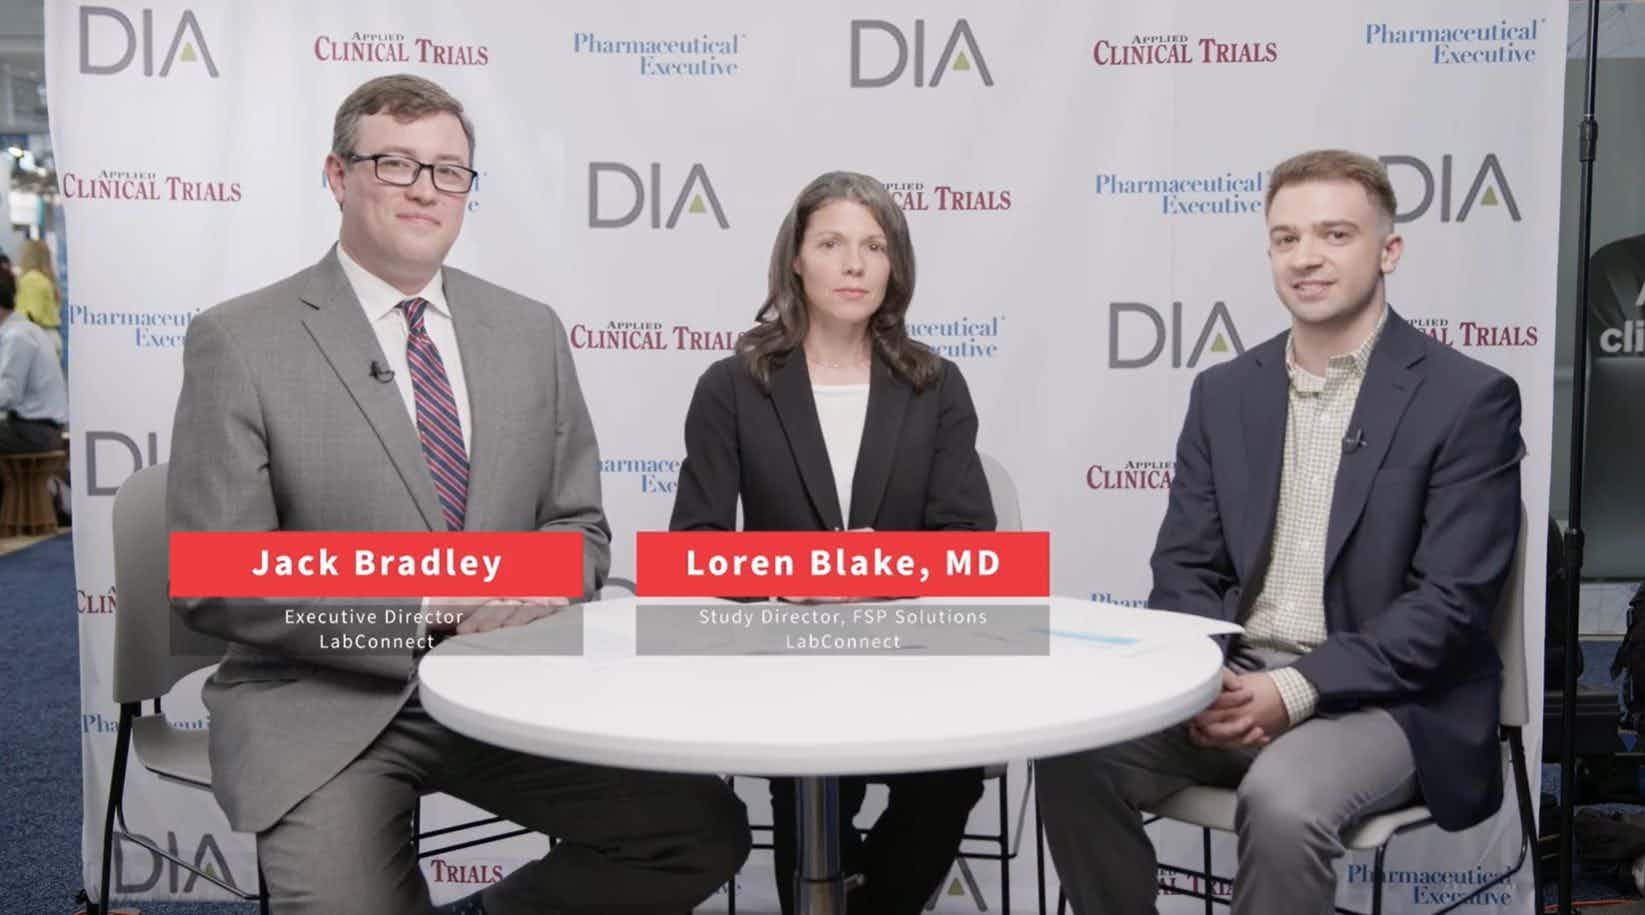 Applied Clinical Trials and LabConnect